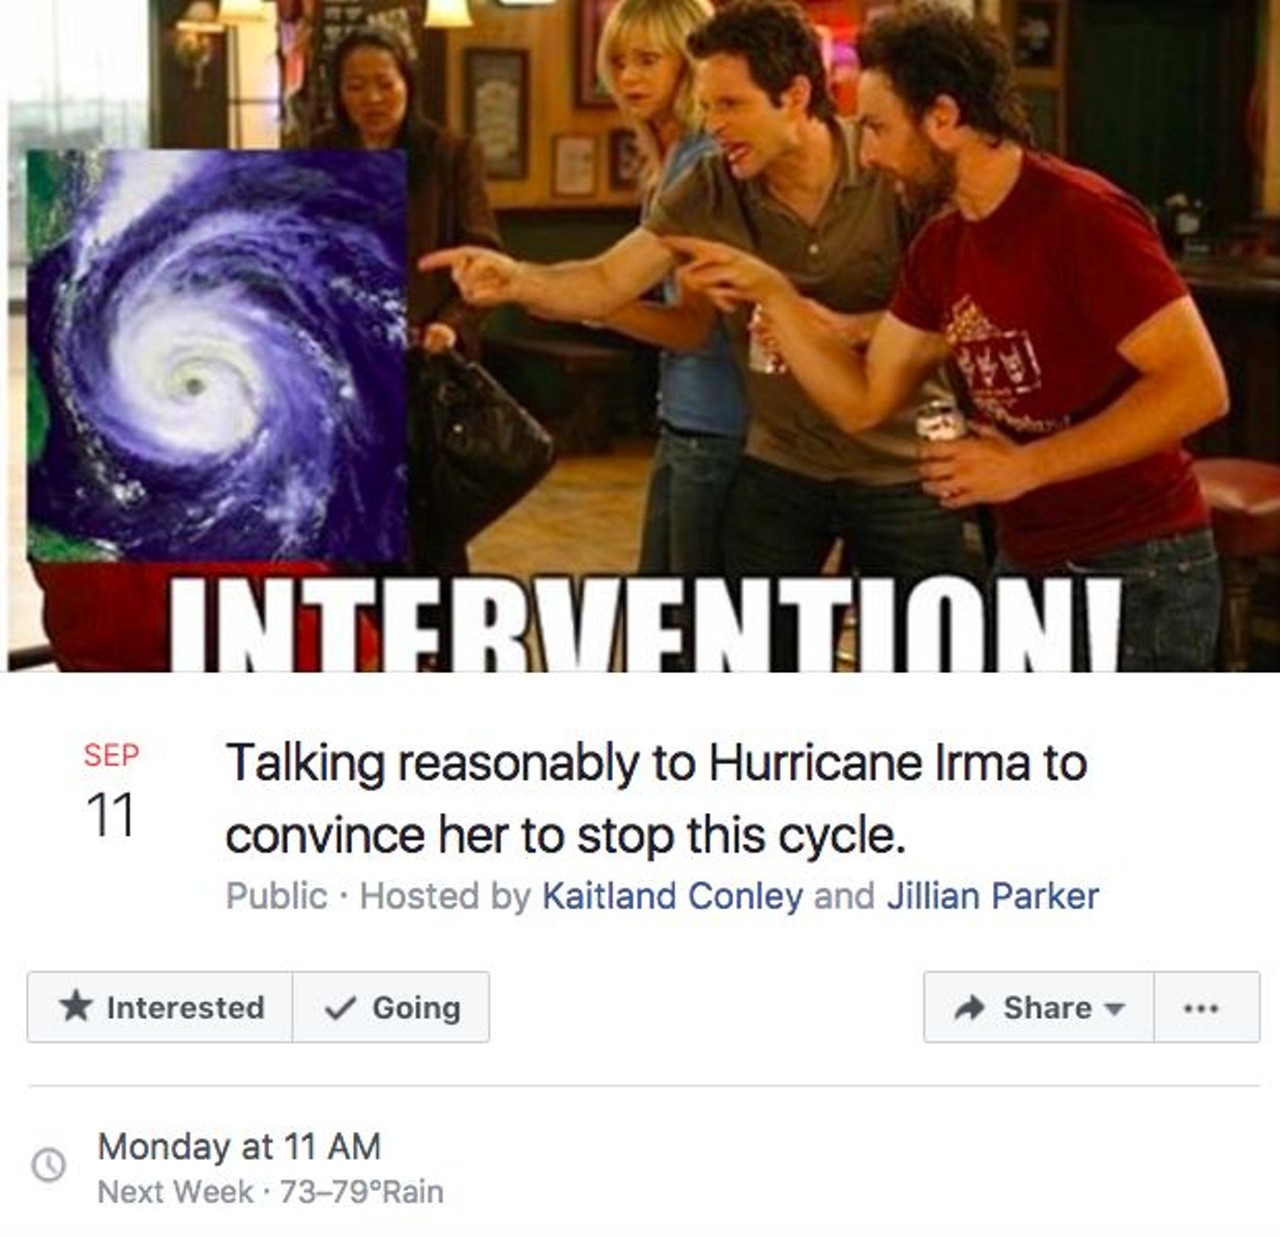 The 20 best Hurricane Irma Facebook events we wish were real